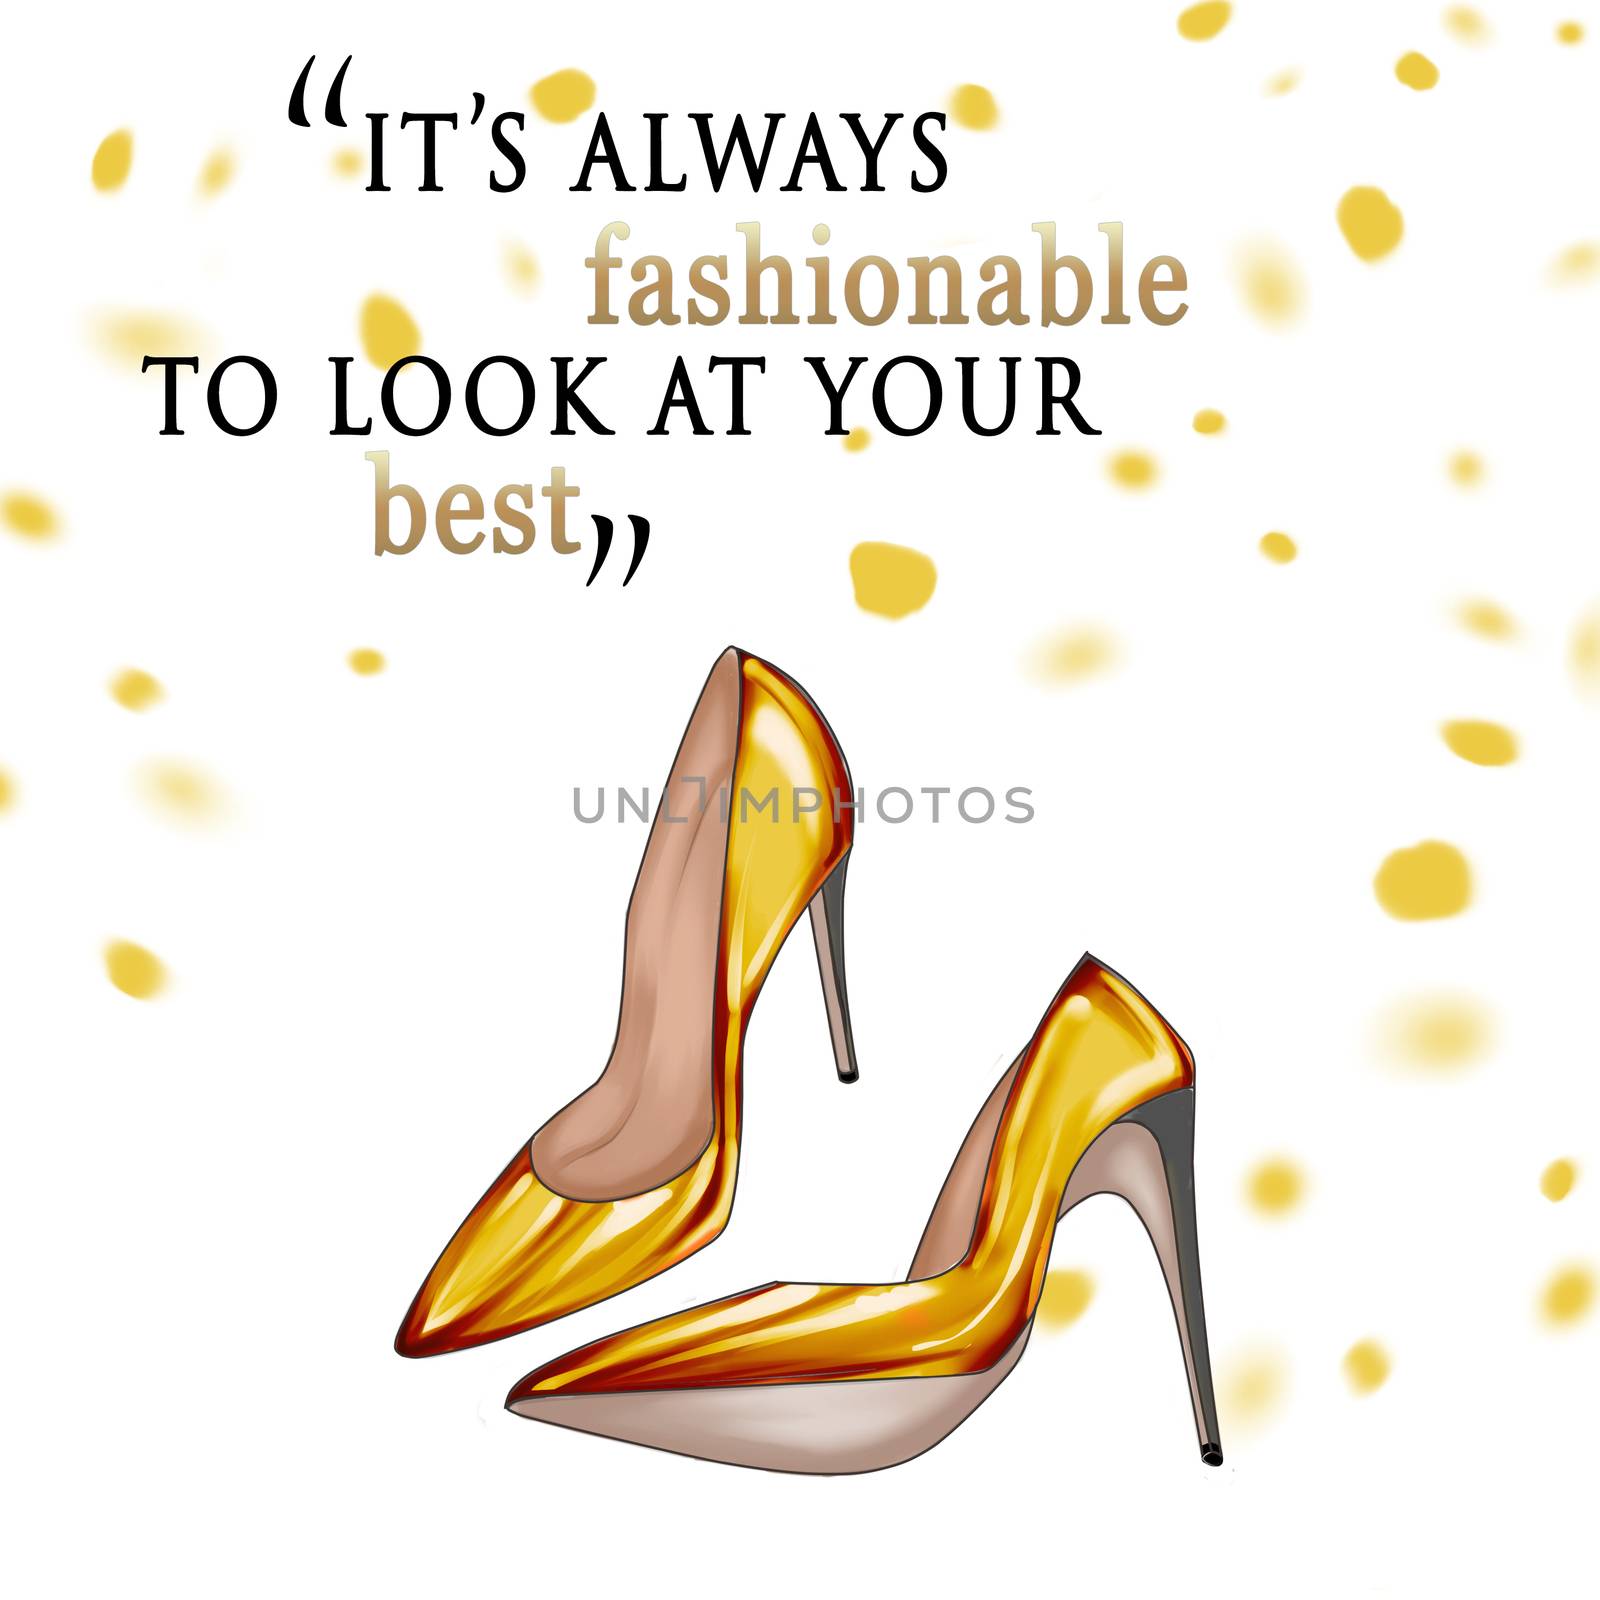 Text funny quotation on white background - fashion illustration - background - postcard - card by GGillustrations